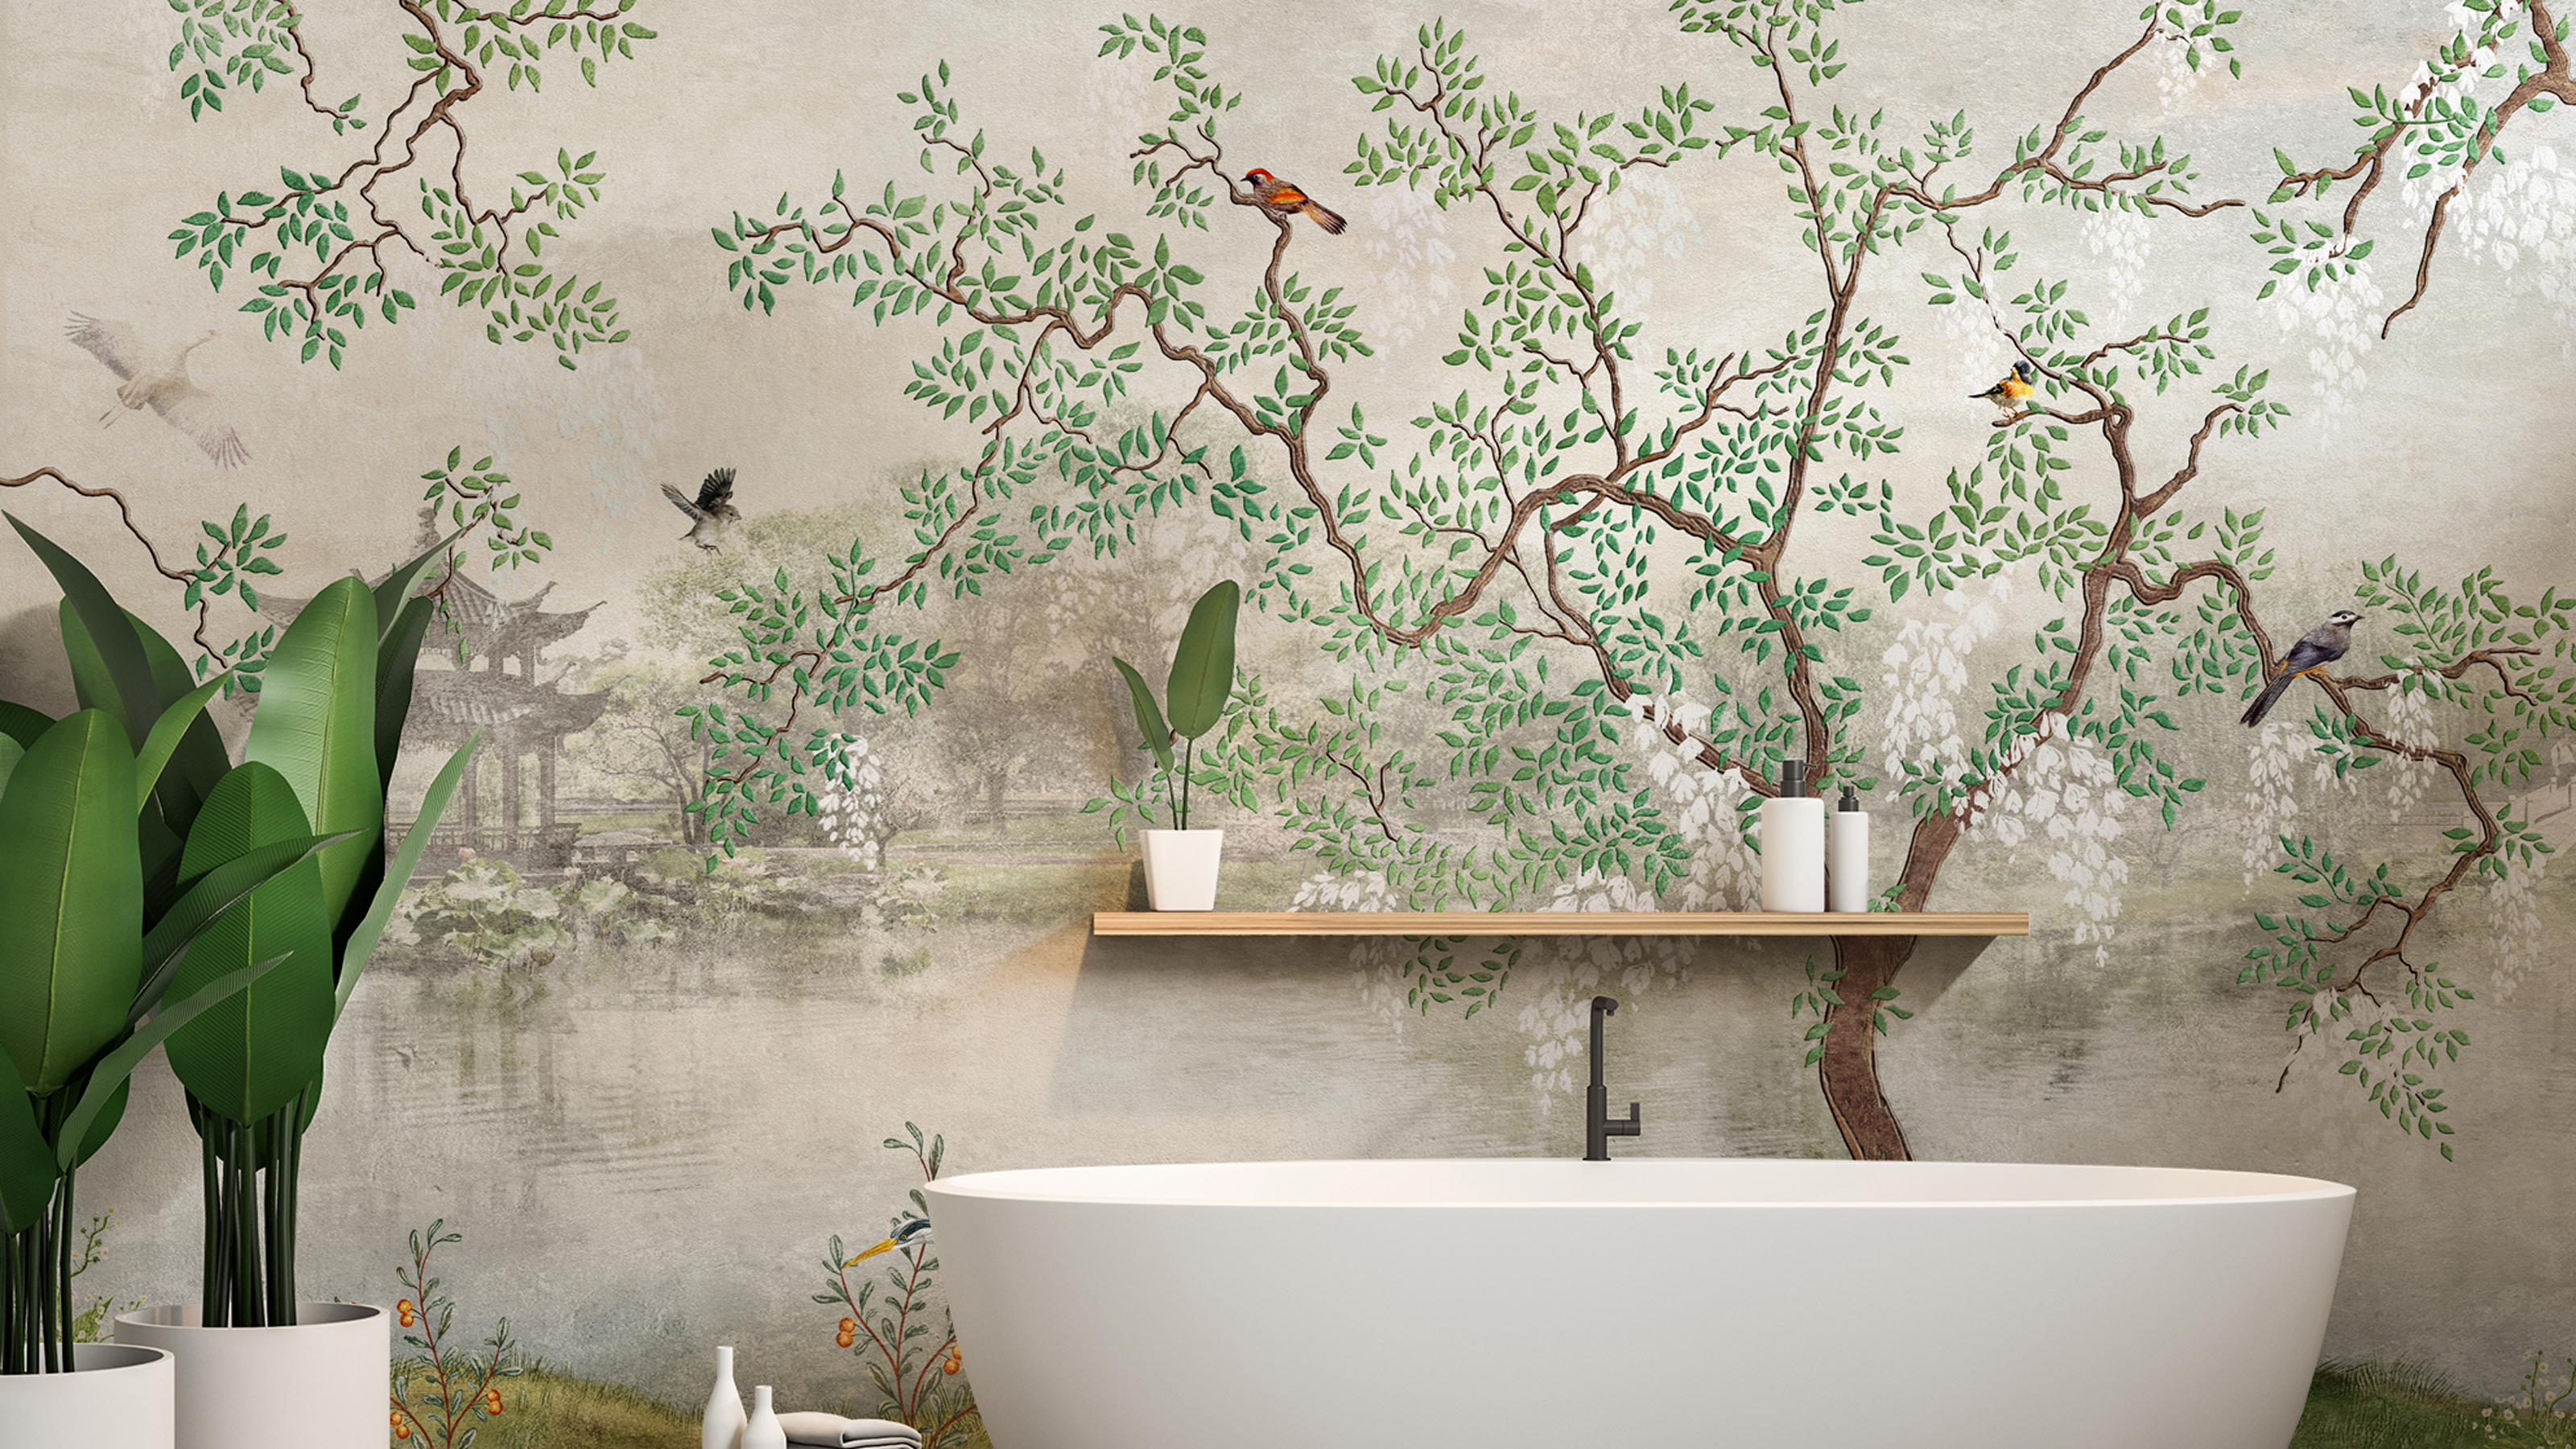 10 wallpaper trends to watch in 2022 – key prints and styles | Real Homes